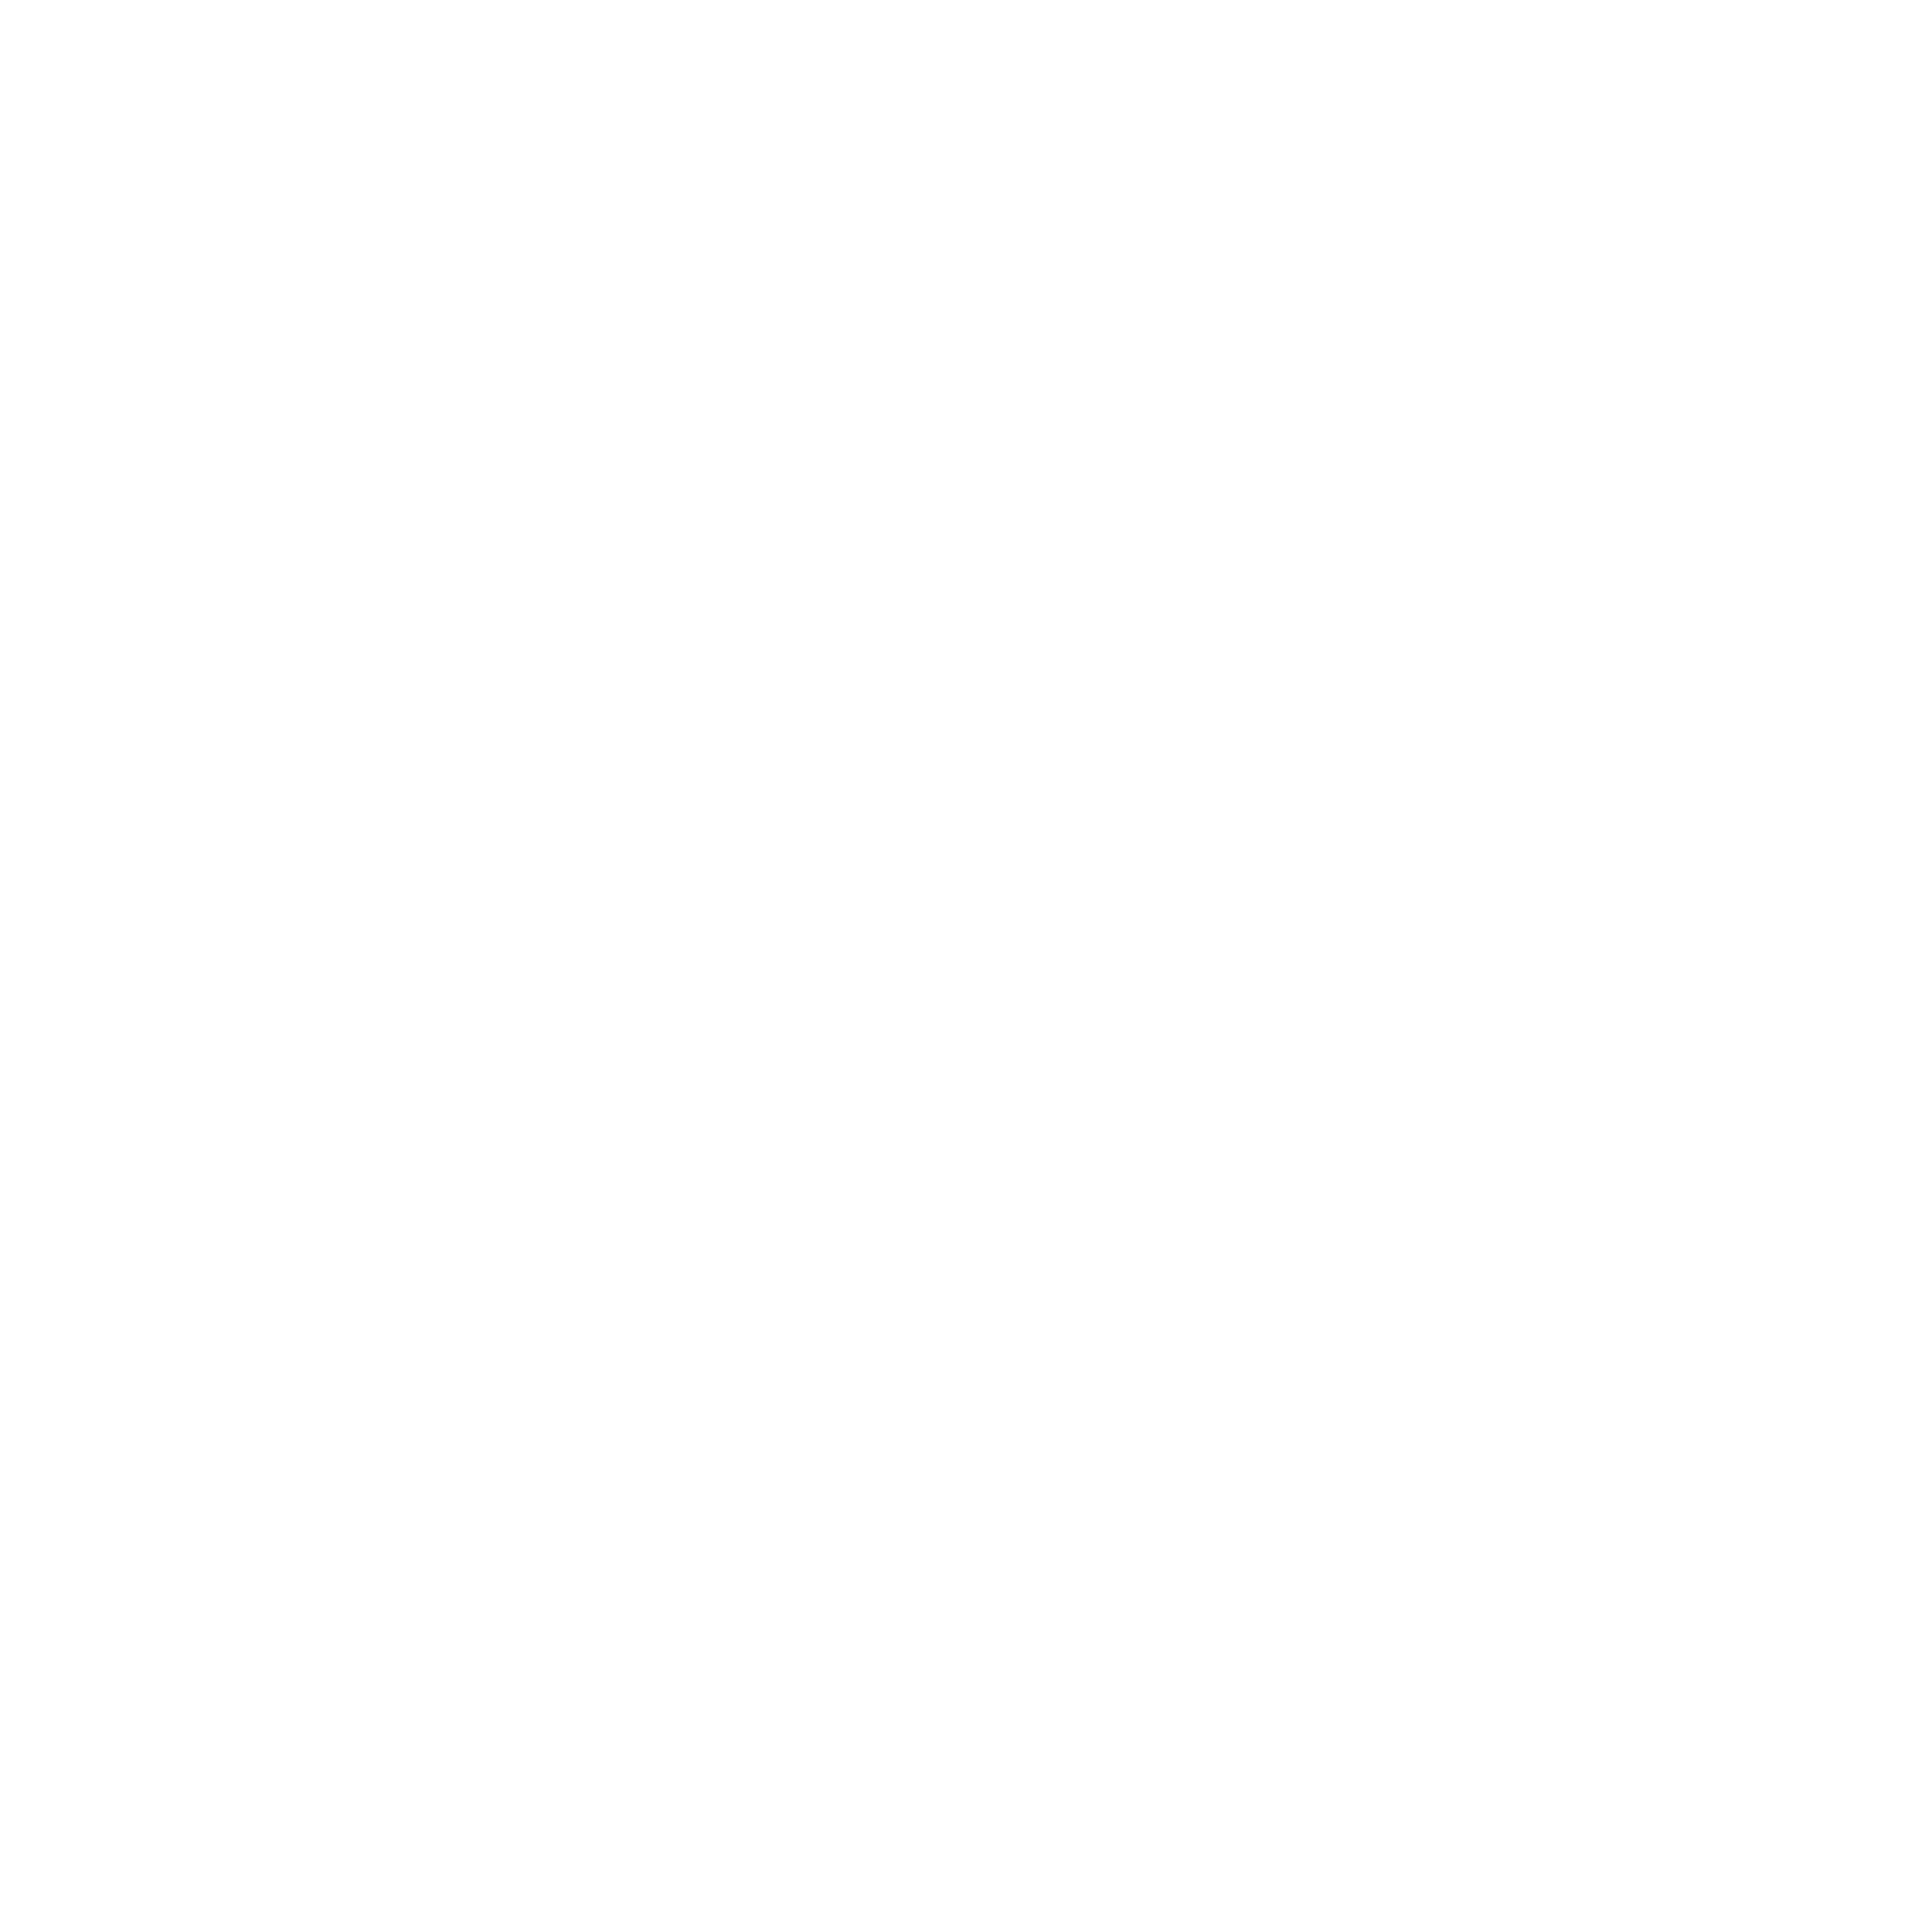 EMERTAINMENT MONTHLY